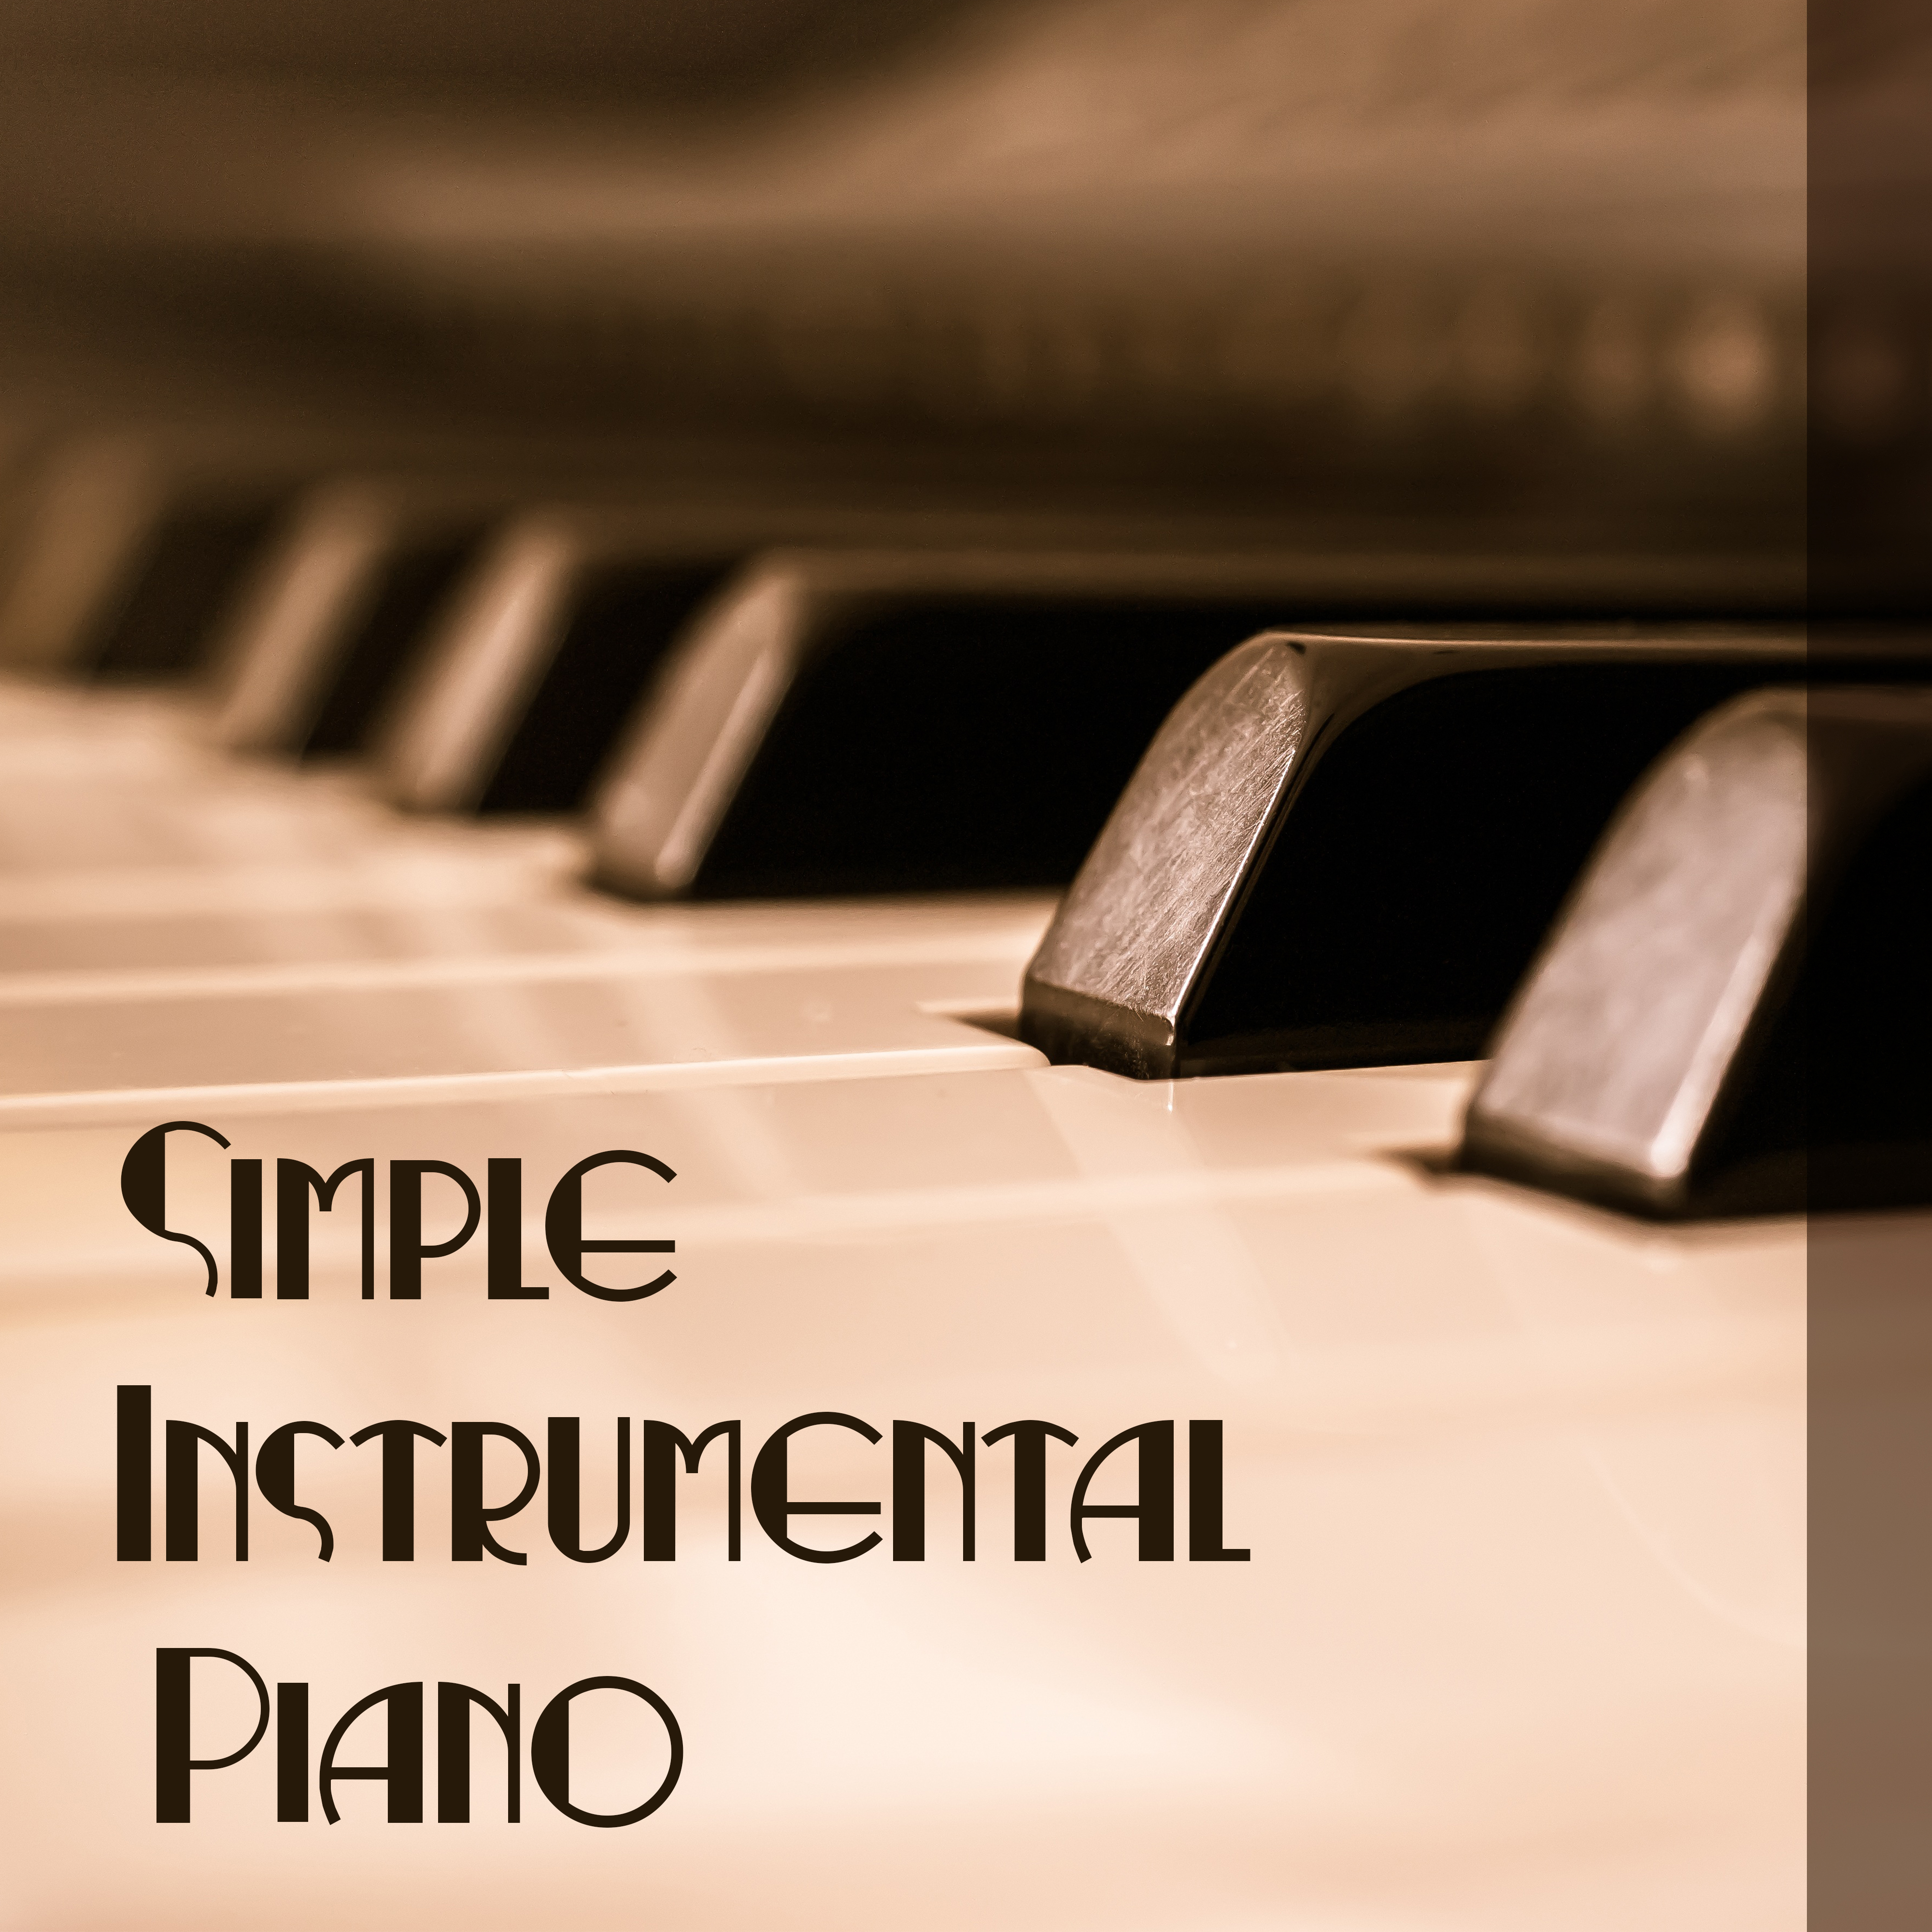 Simple Instrumental Piano – Easy Listening Jazz, Mellow Sounds, Smooth Jazz Lounge, Jazz for Sleep